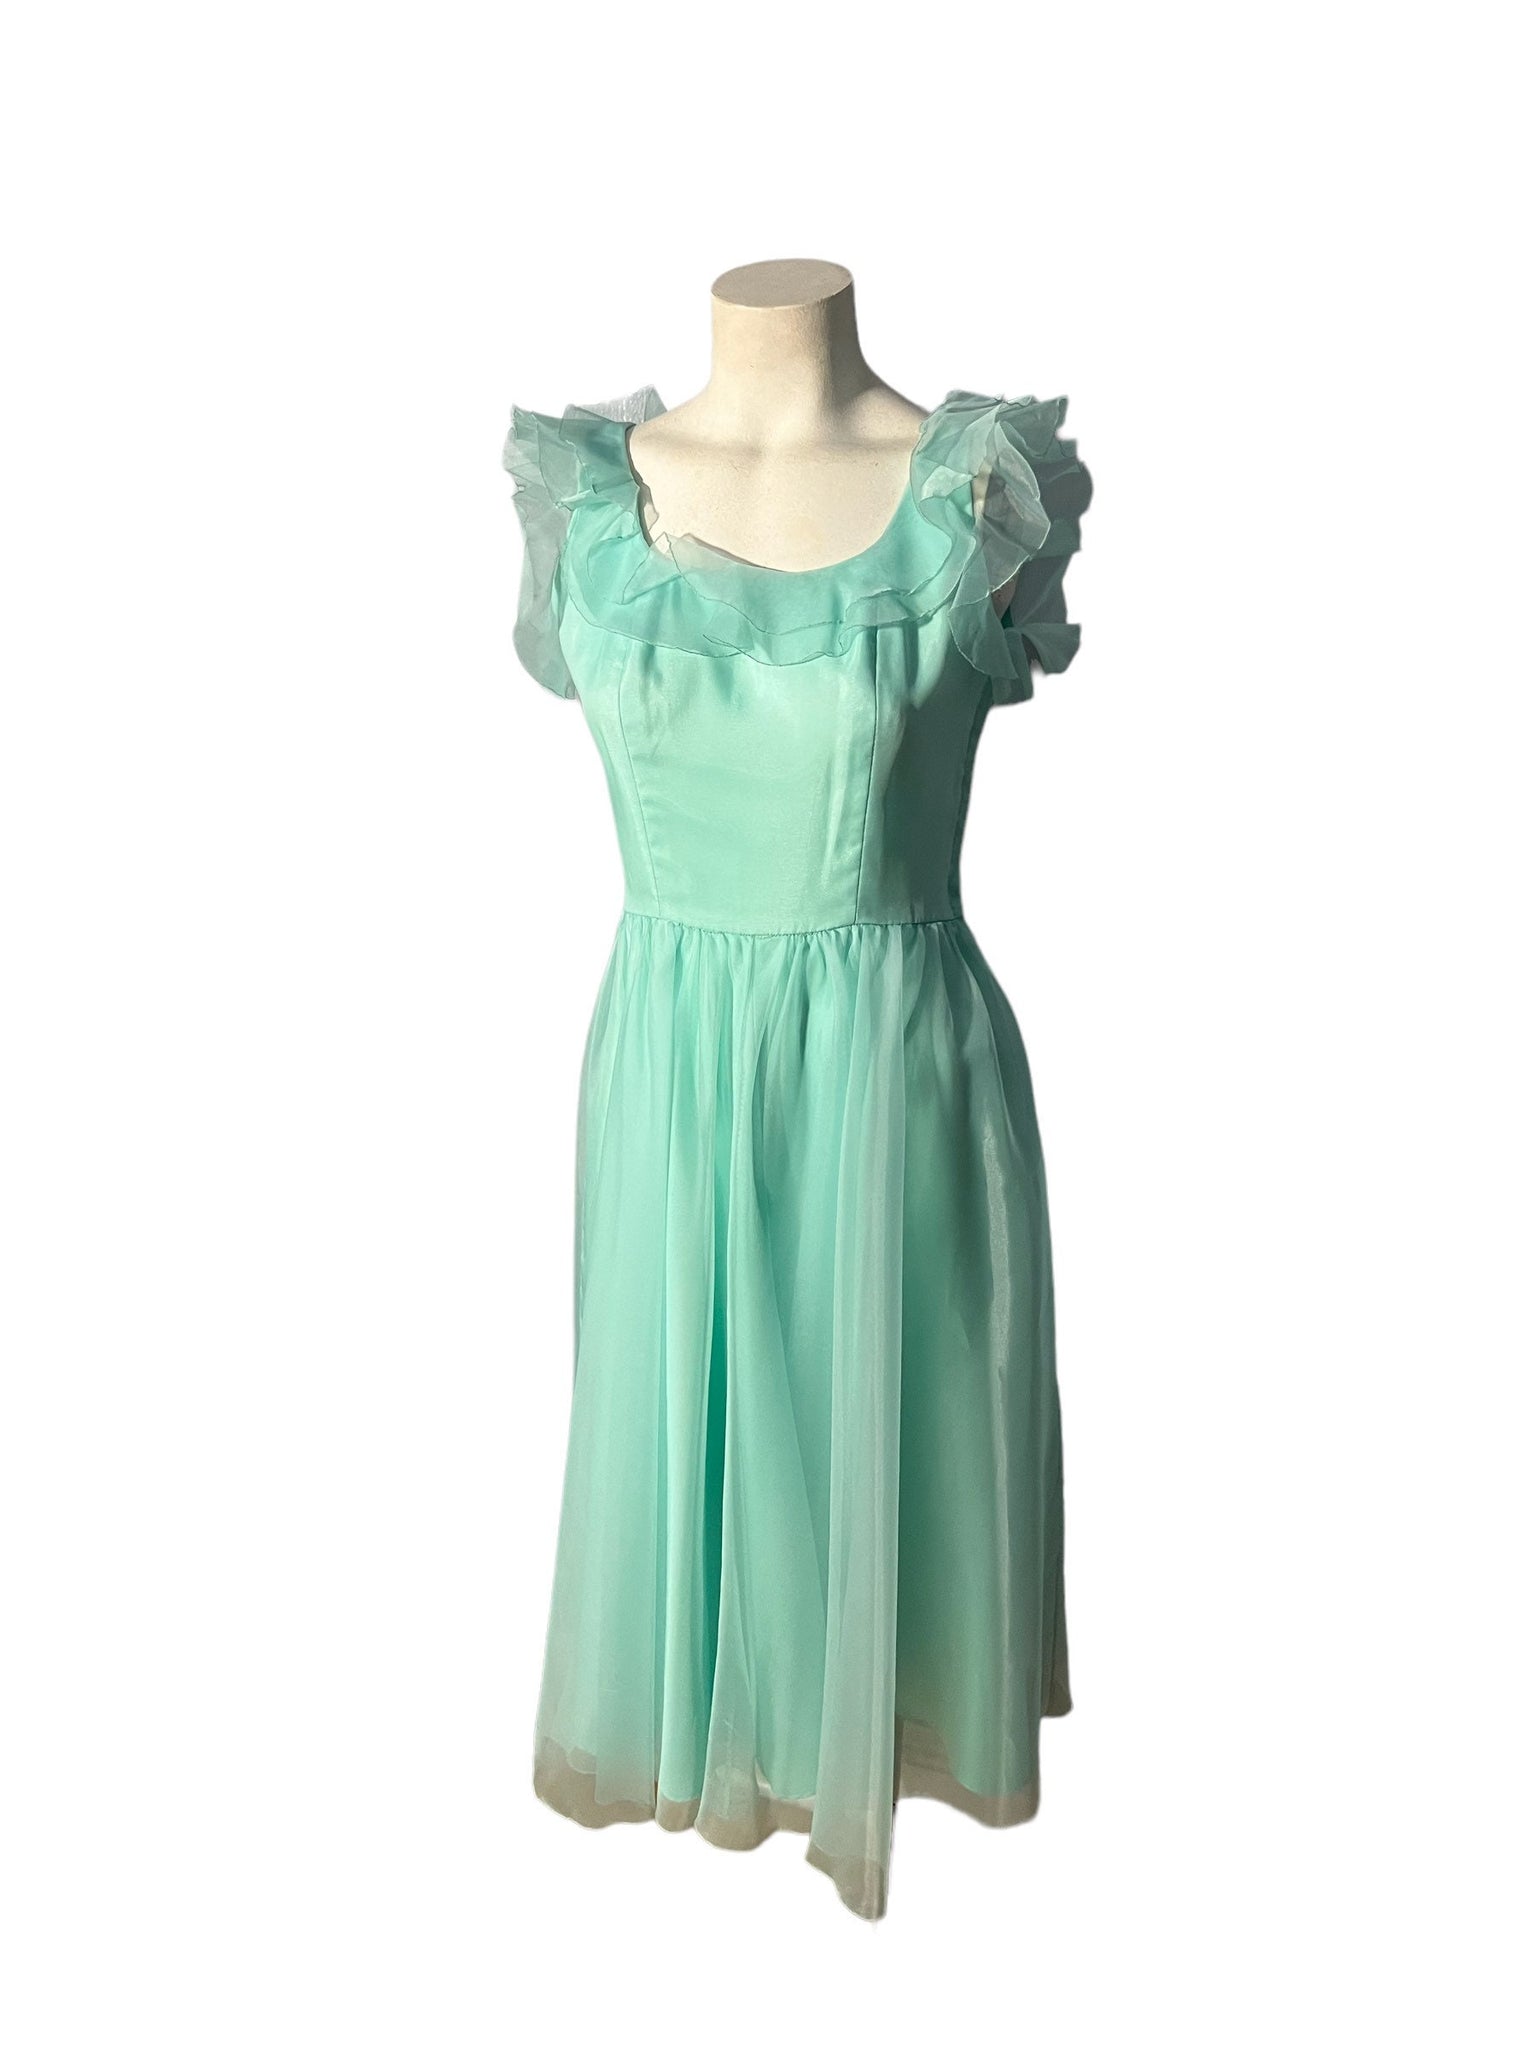 Vintage 60's turquoise party dress S